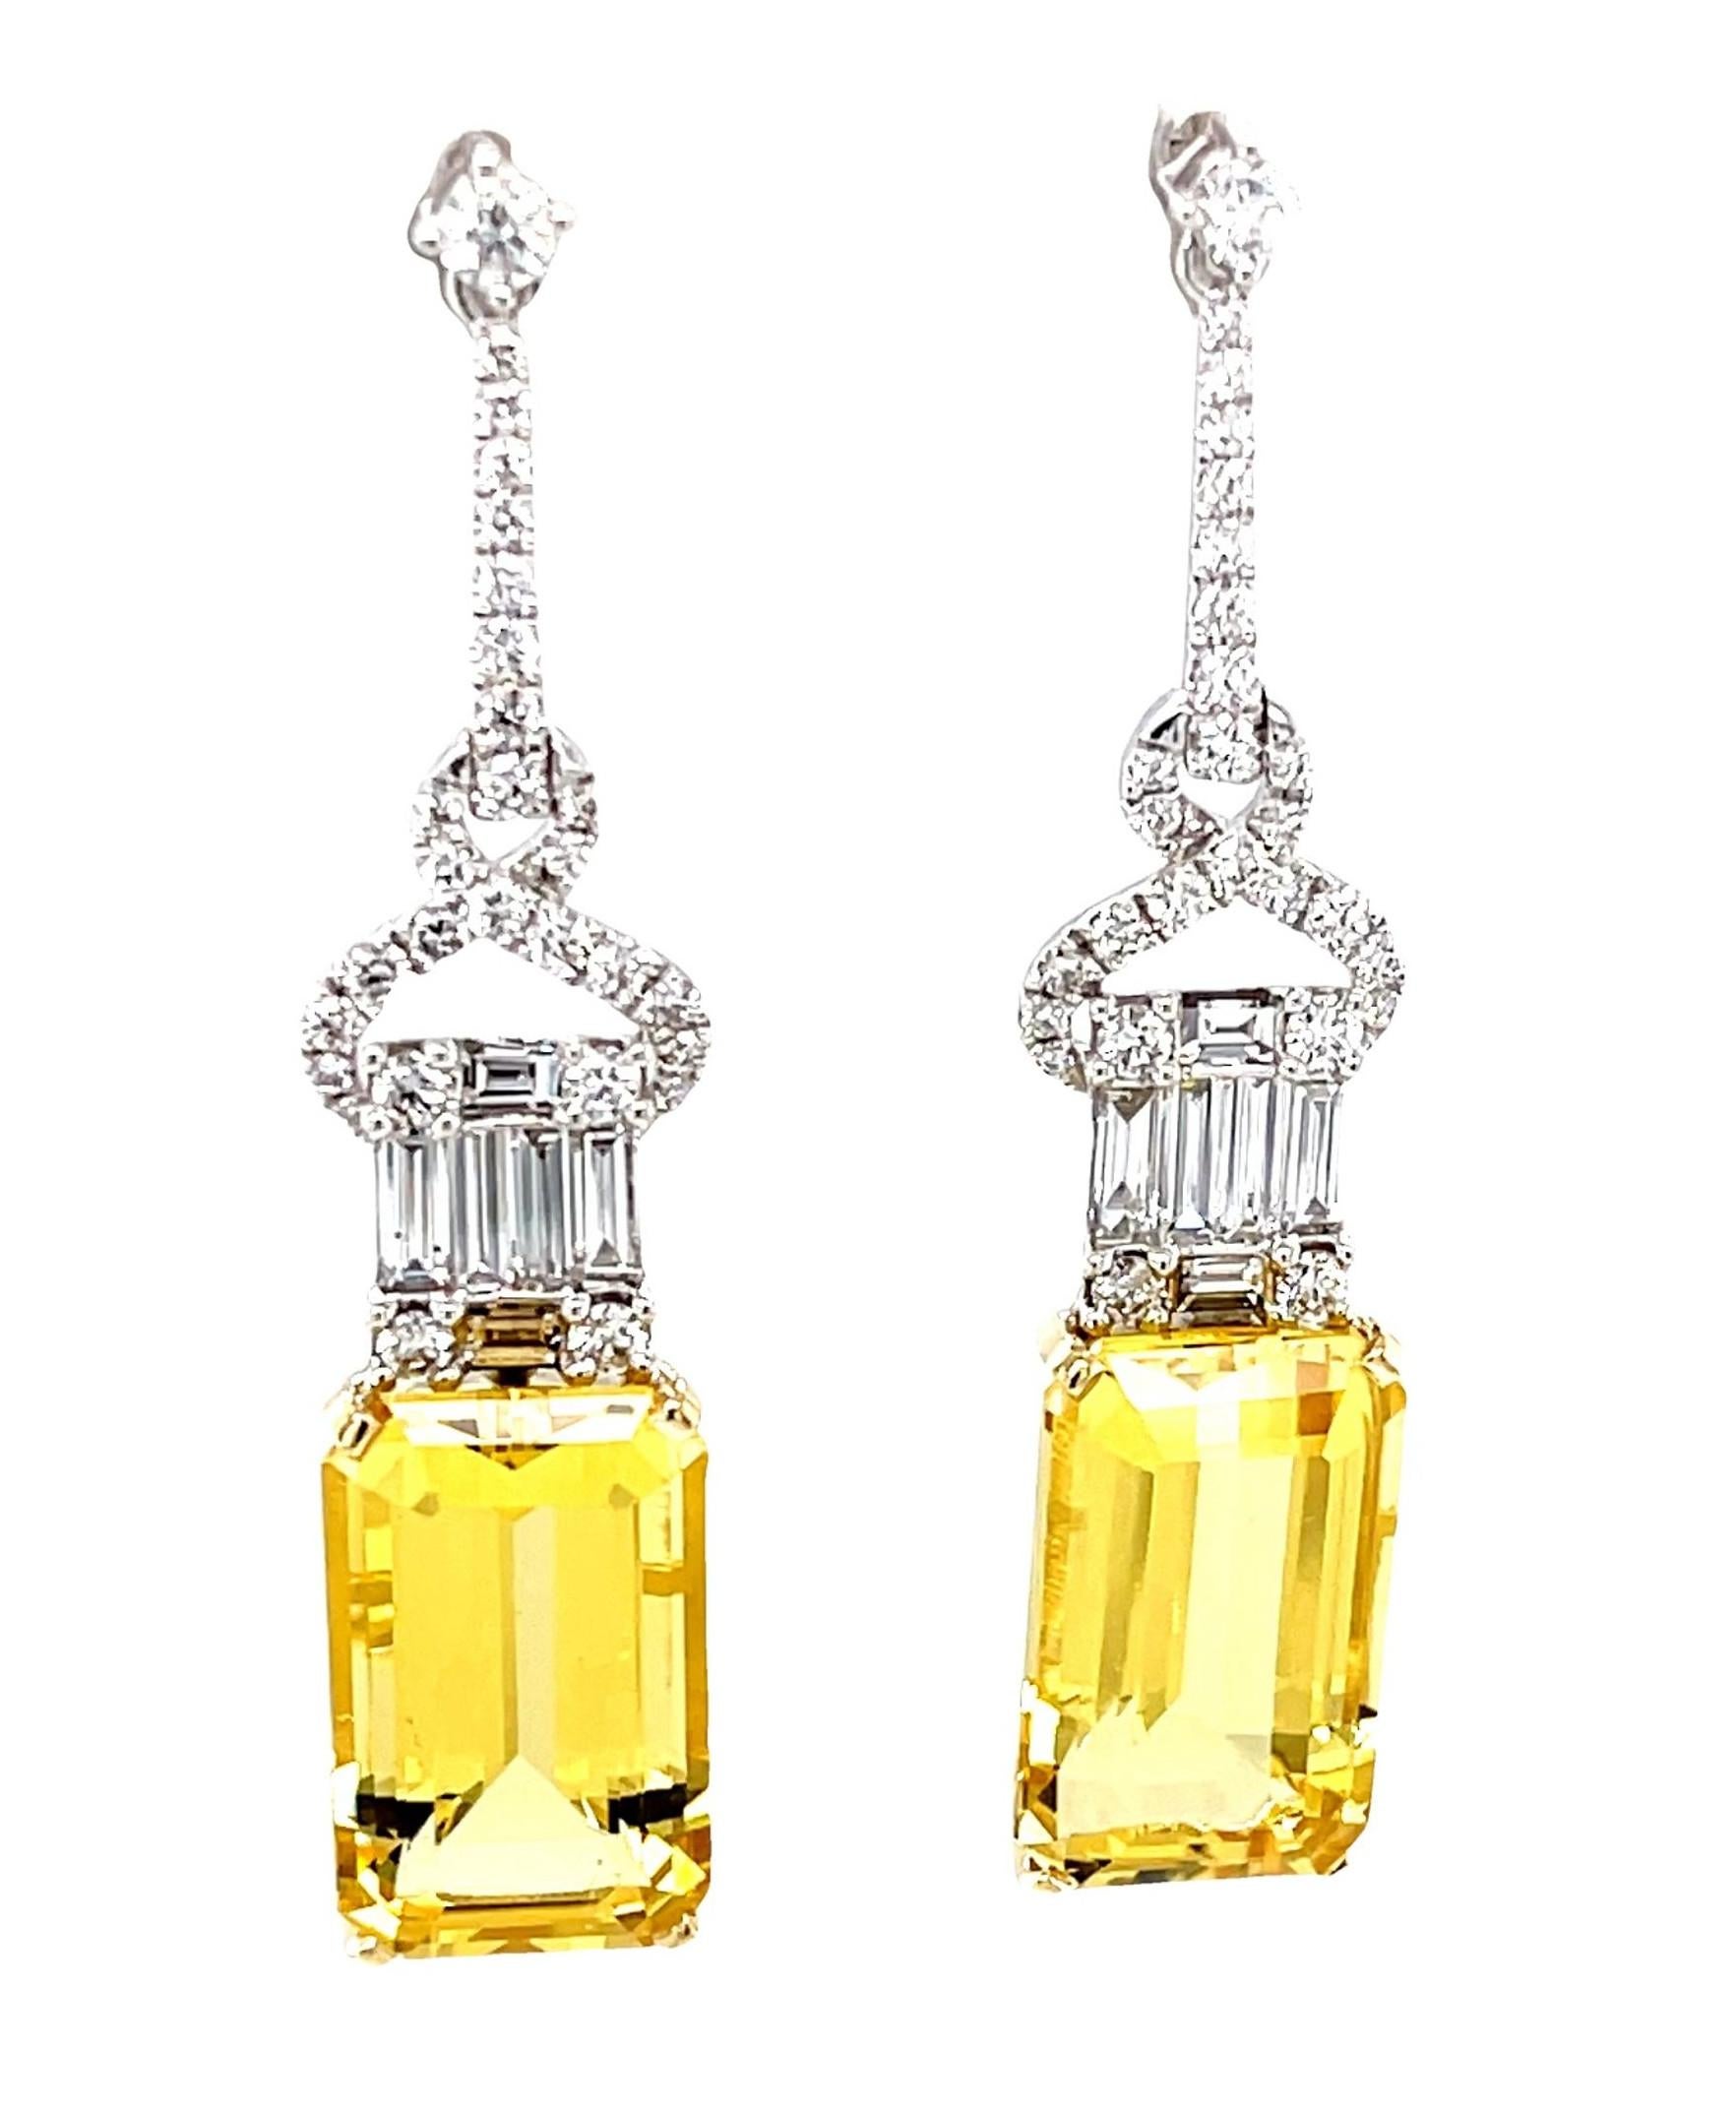 These glamorous golden beryl and diamond earrings are so elegant and eye-catching, you'll want to fill your social calendar just so you can show them off! The emerald-cut faceting of the fine quality, crystalline beryl draws attention to the